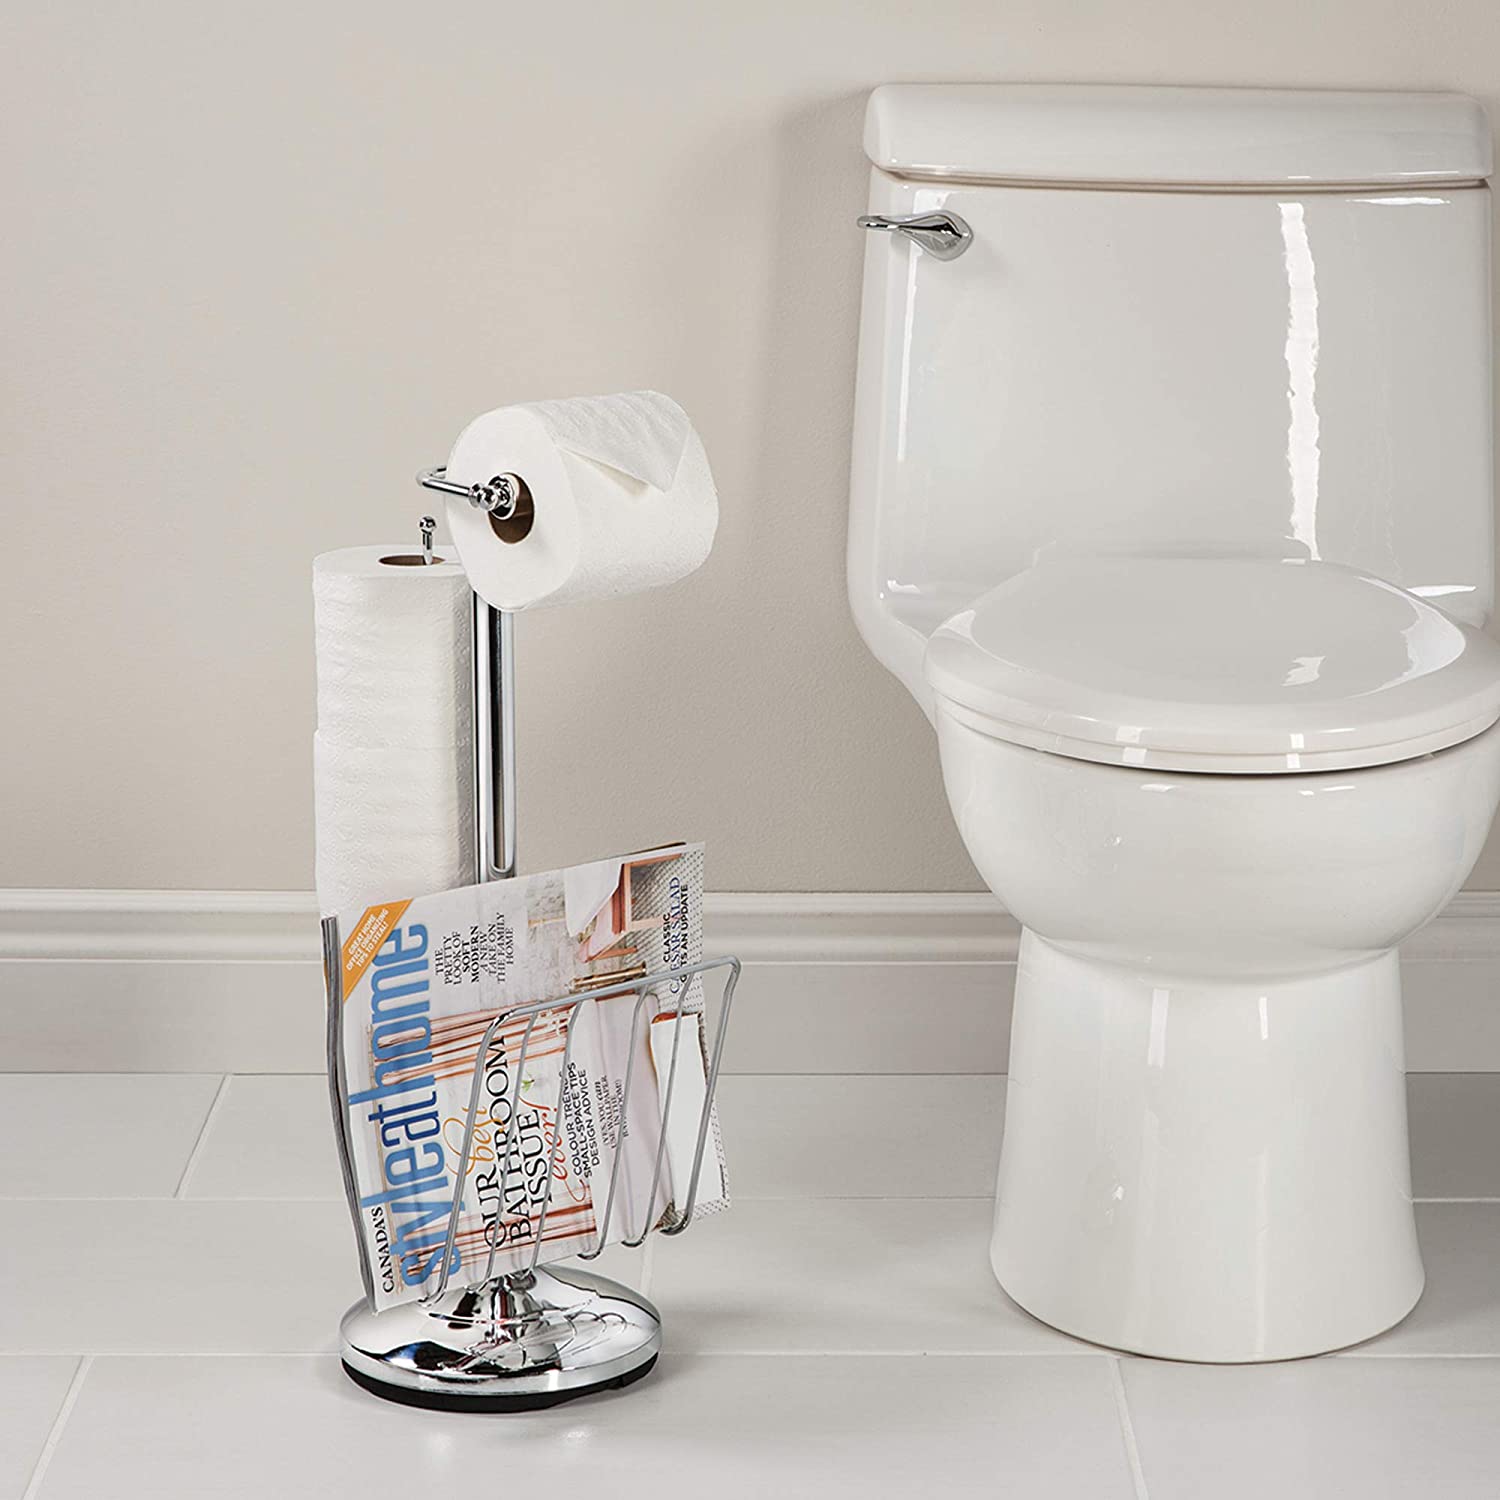 Better Living Products Toilet Caddy Magazine Rack